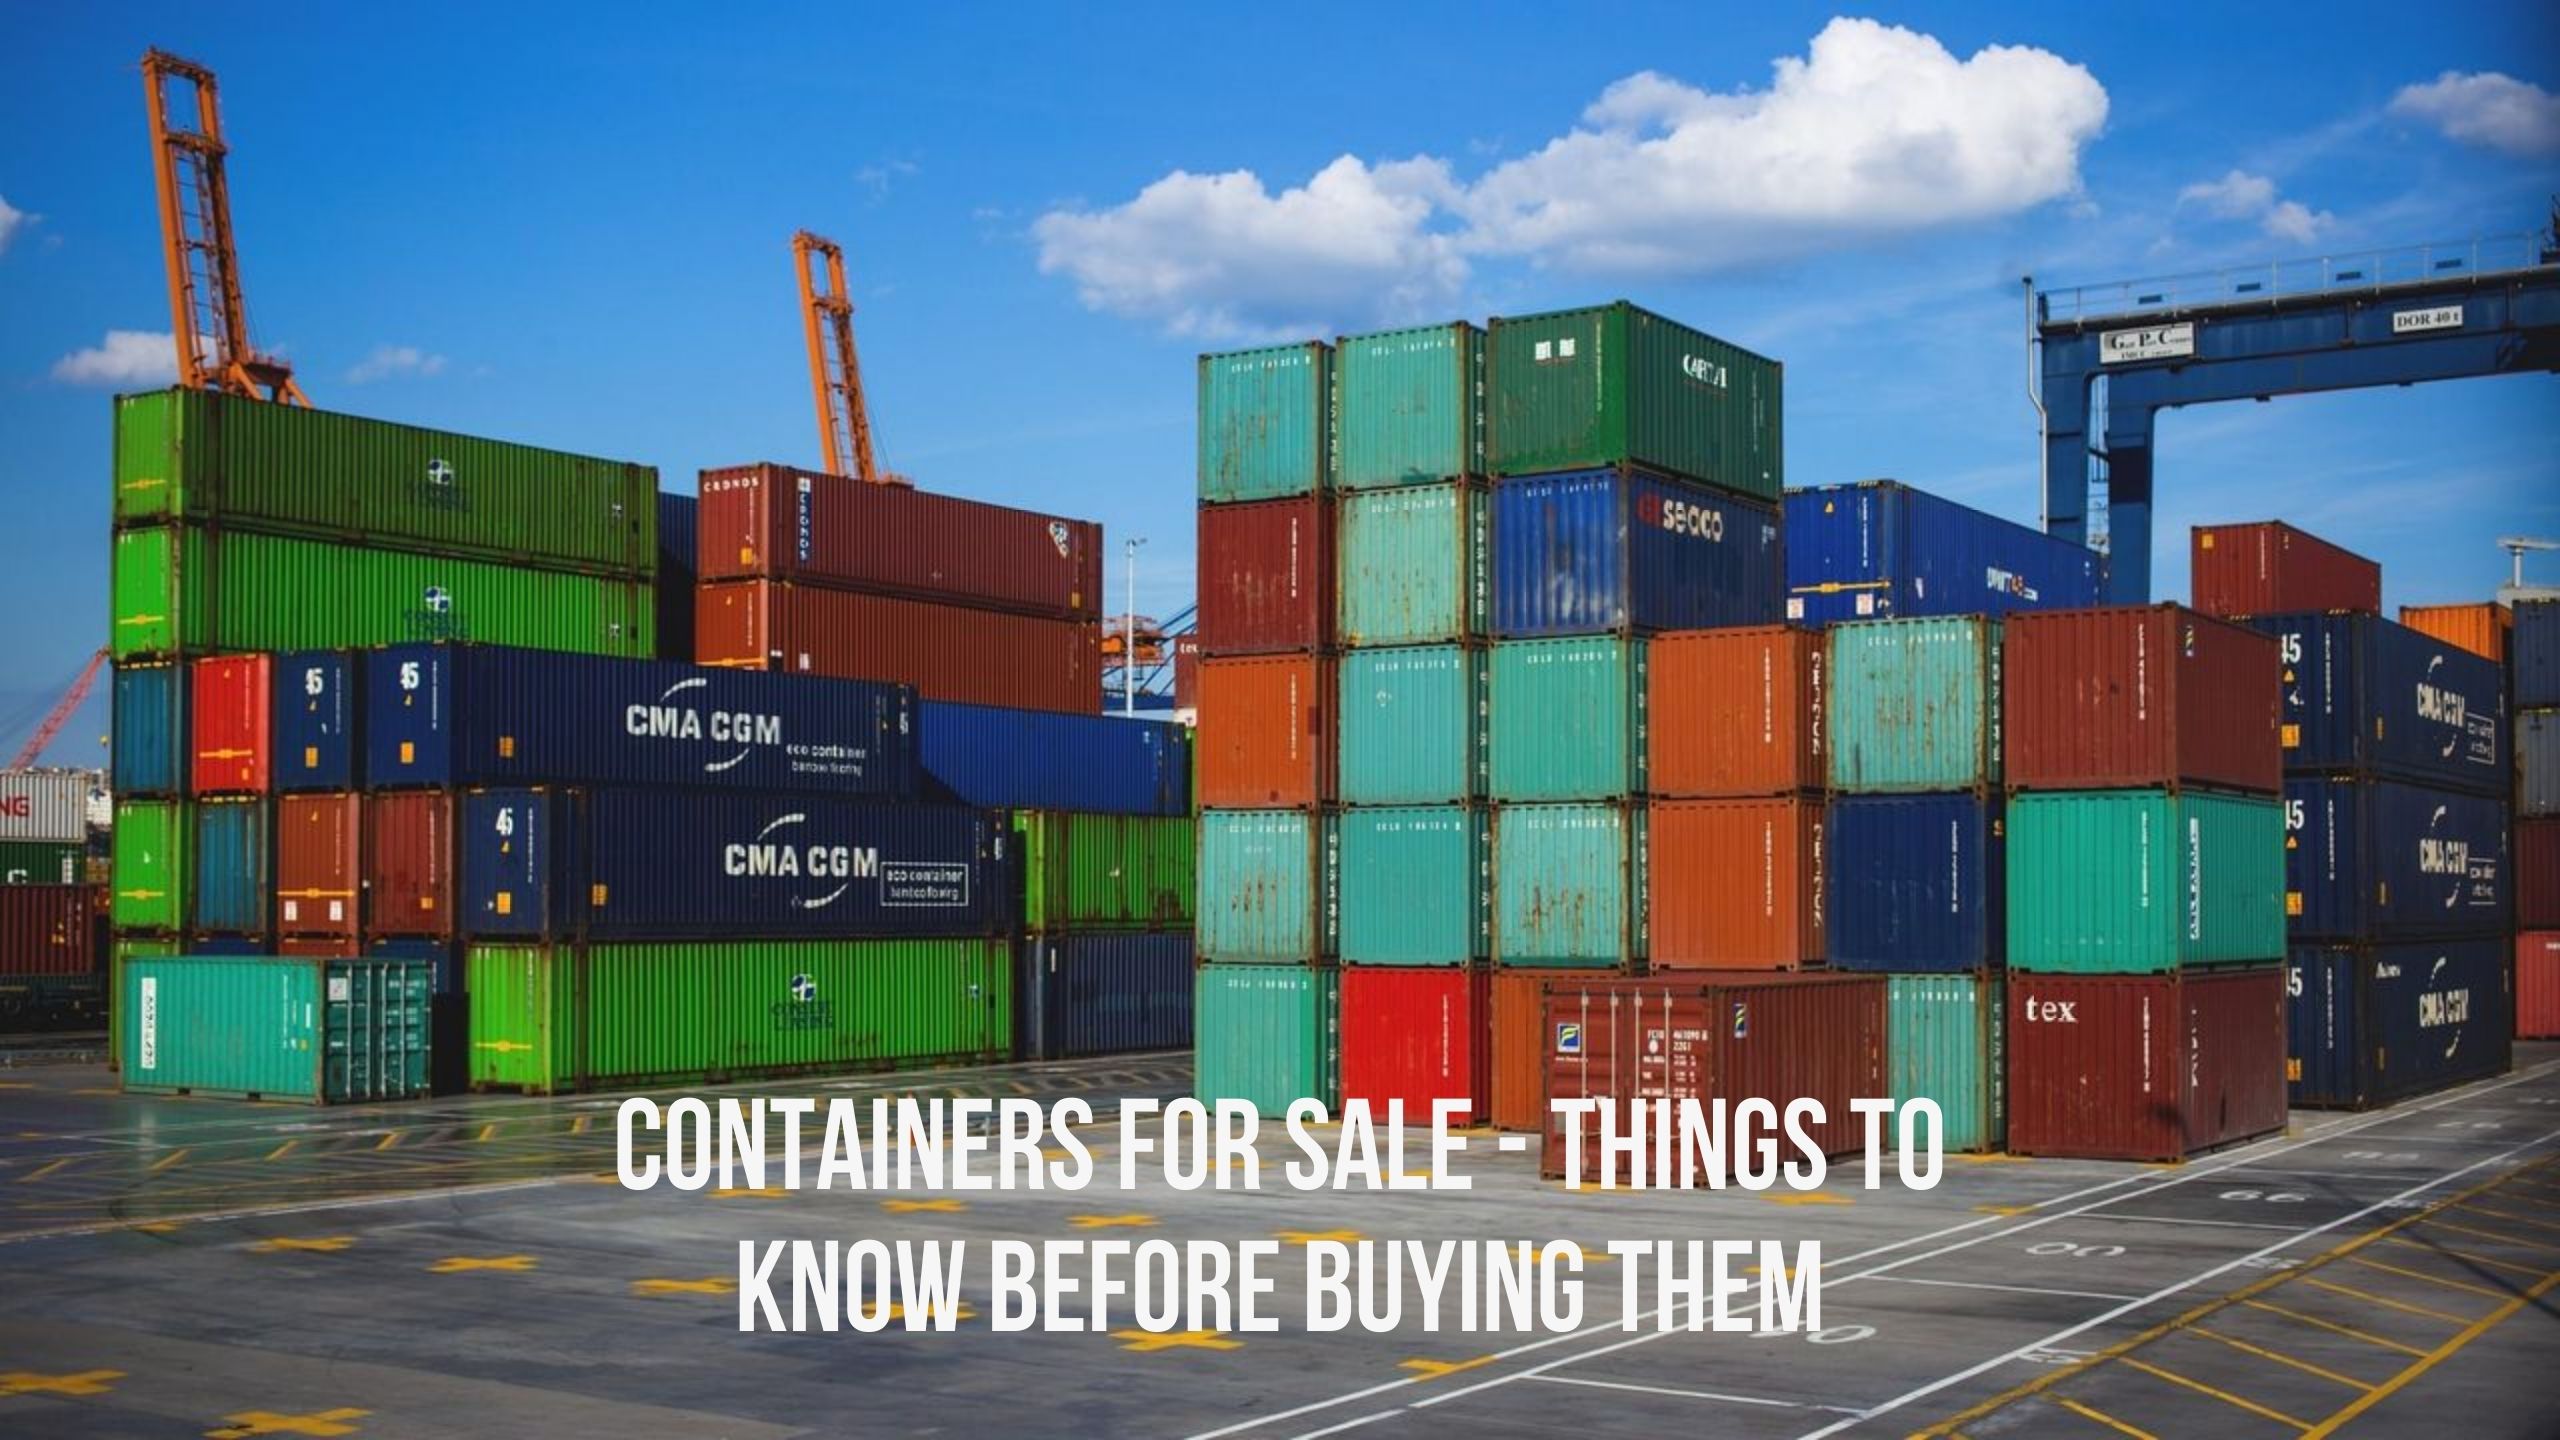 Containers For Sale - Things To Know Before Buying Them